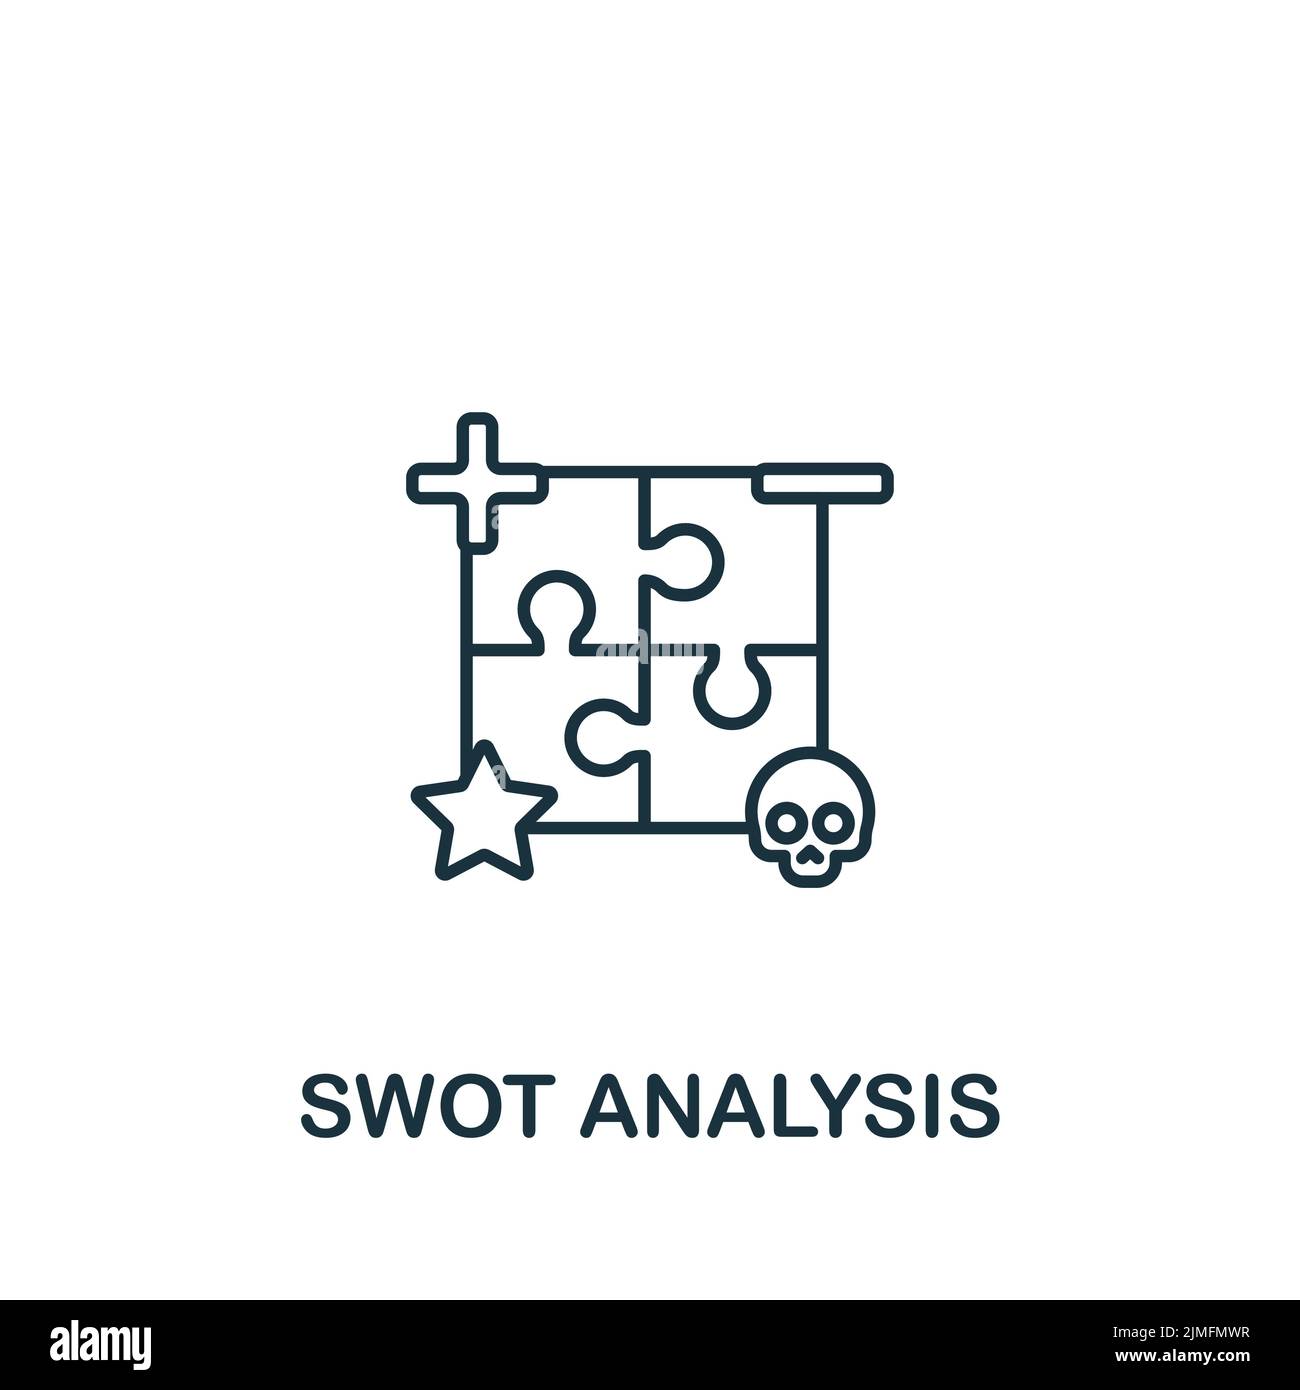 Swot Analysis icon. Monochrome simple icon for templates, web design and infographics Stock Vector